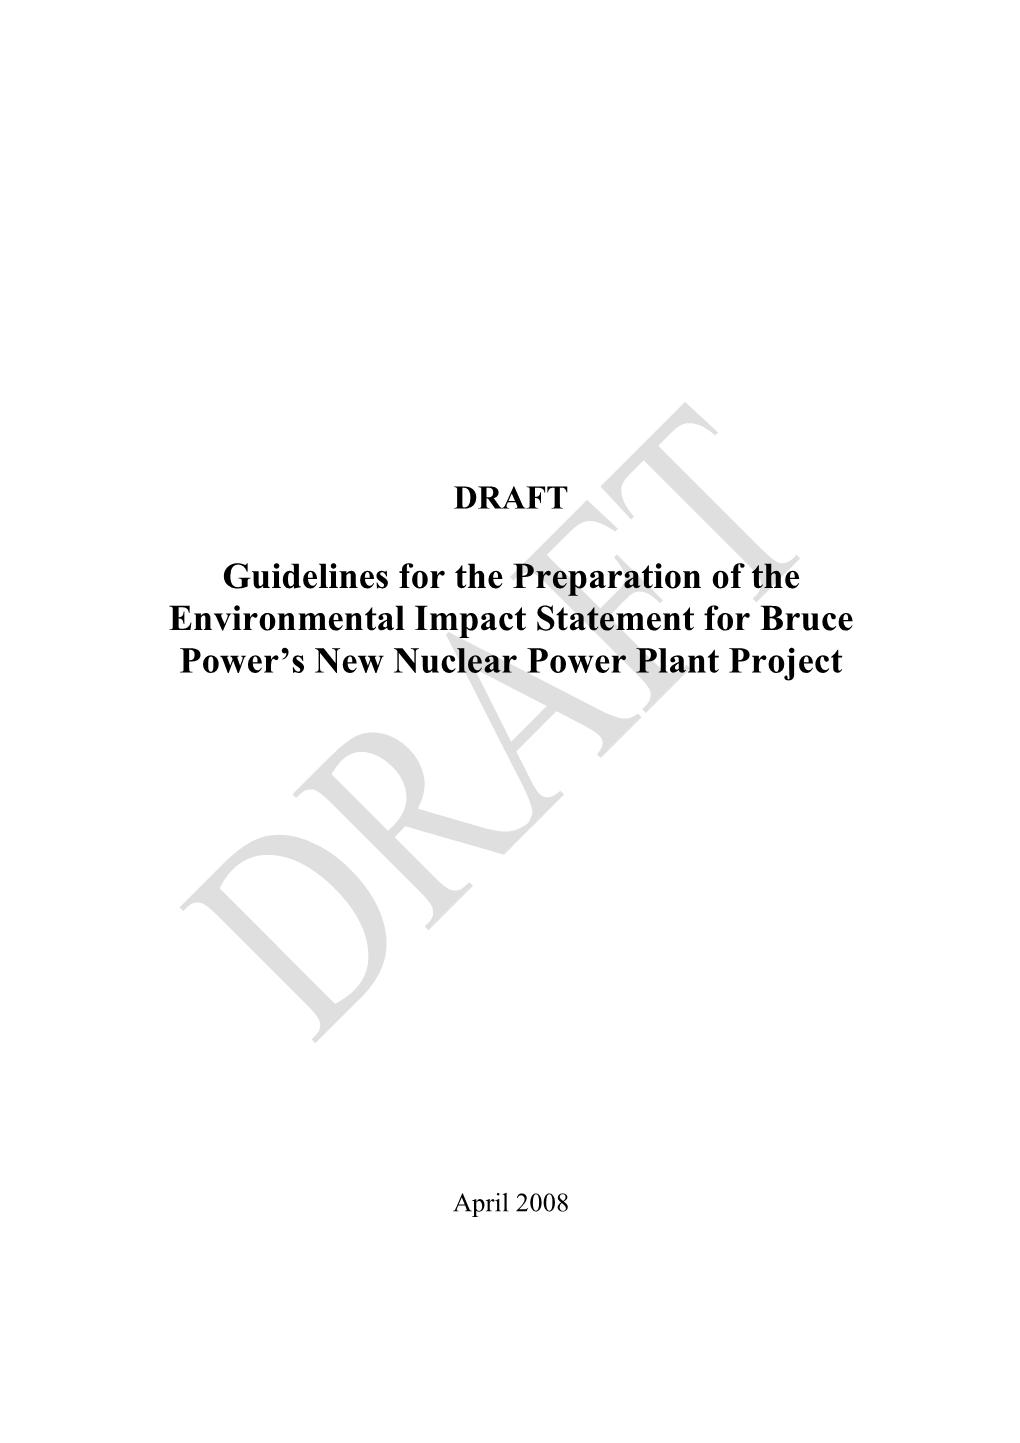 Guidelines for the Preparation of the Environmental Impact Statement for Bruce Power’S New Nuclear Power Plant Project